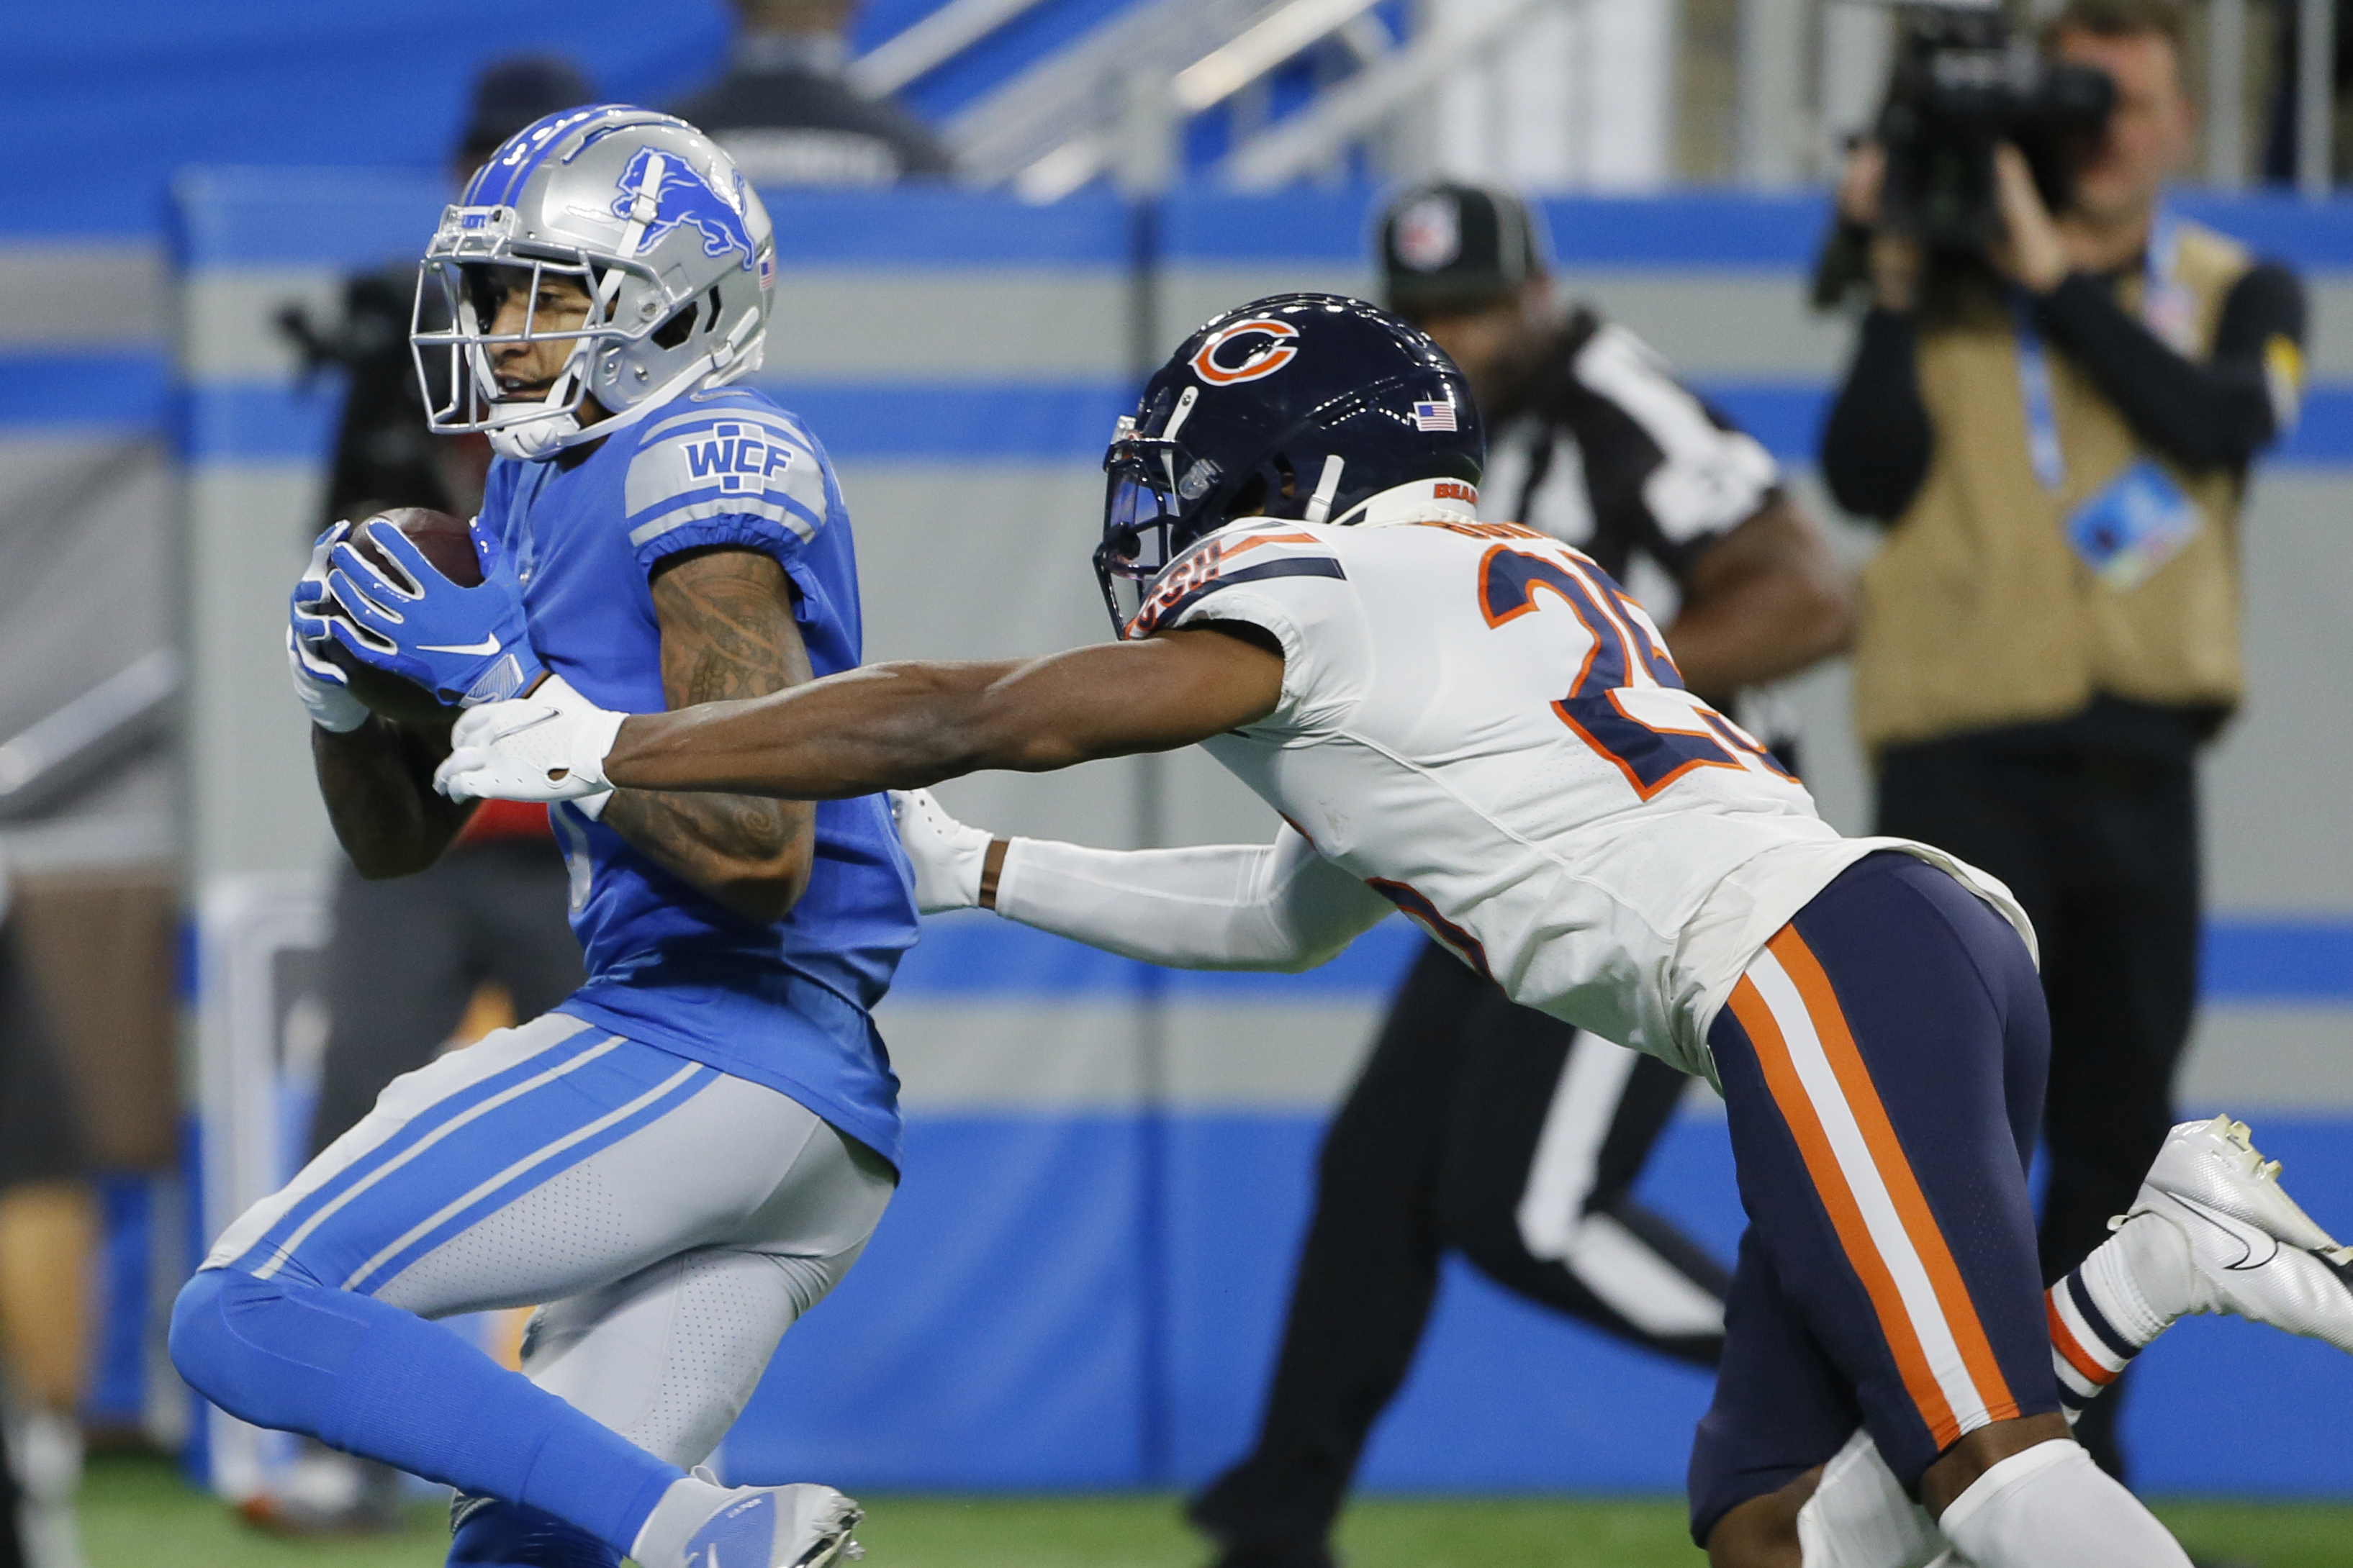 Big Sean to perform at halftime of Lions-Bears Thanksgiving game